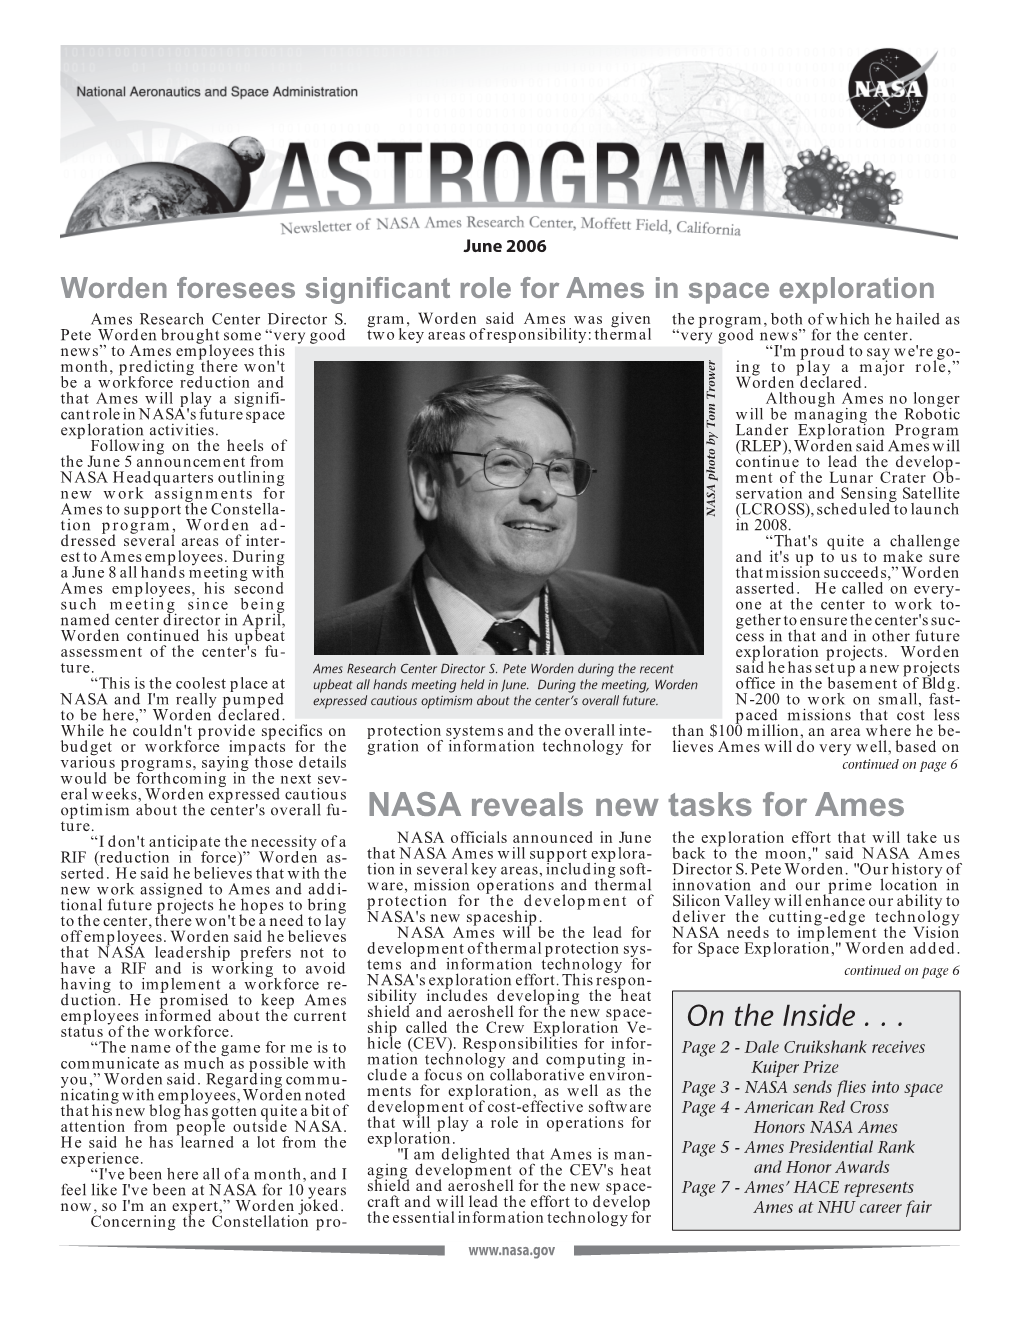 Worden Foresees Significant Role for Ames in Space Exploration Ames Research Center Director S